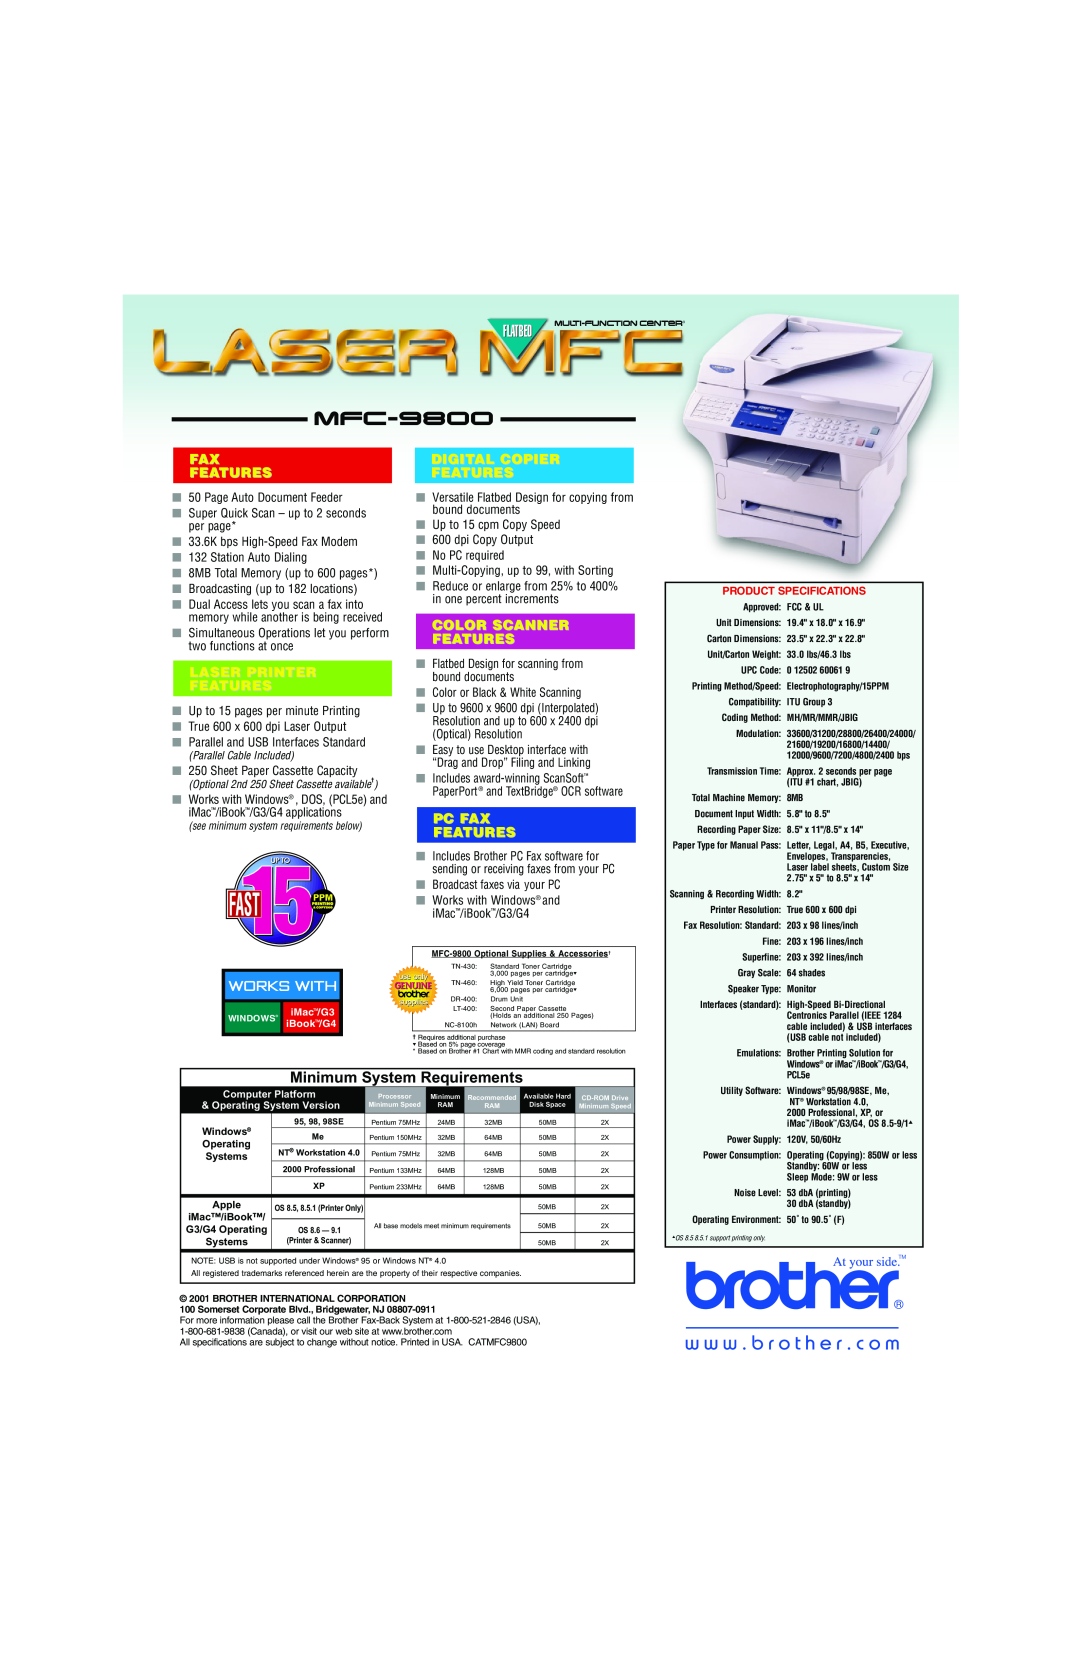 Brother MFC-9800 Minimum System Requirements, Fax Features, Laser Printer Features, Digital Copier Features, Works With 